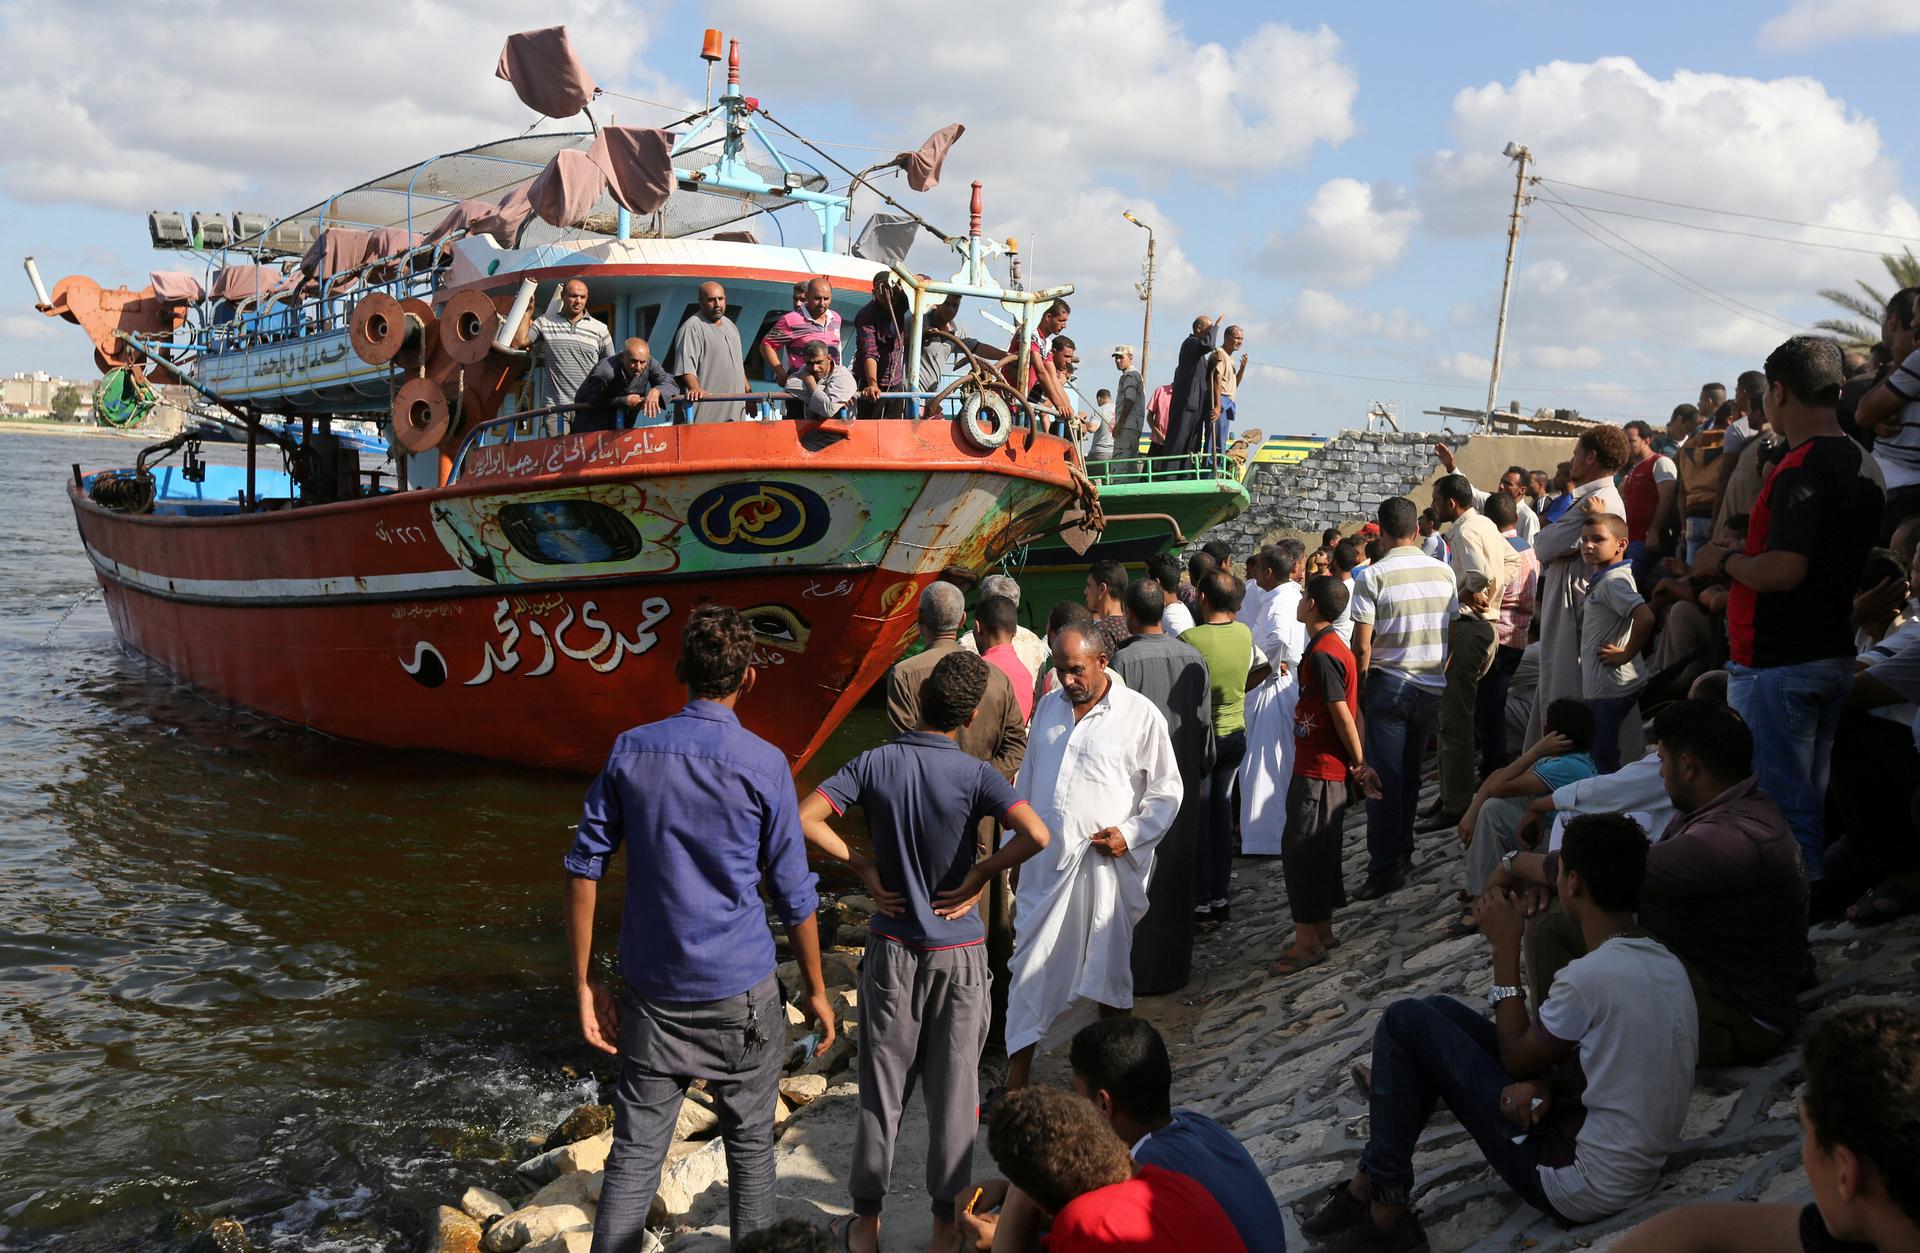 People gather along the shore of the Mediterranean Sea during a search for victims after a migrant boat capsized, in Al-Beheira, Egypt, September 22, 2016.